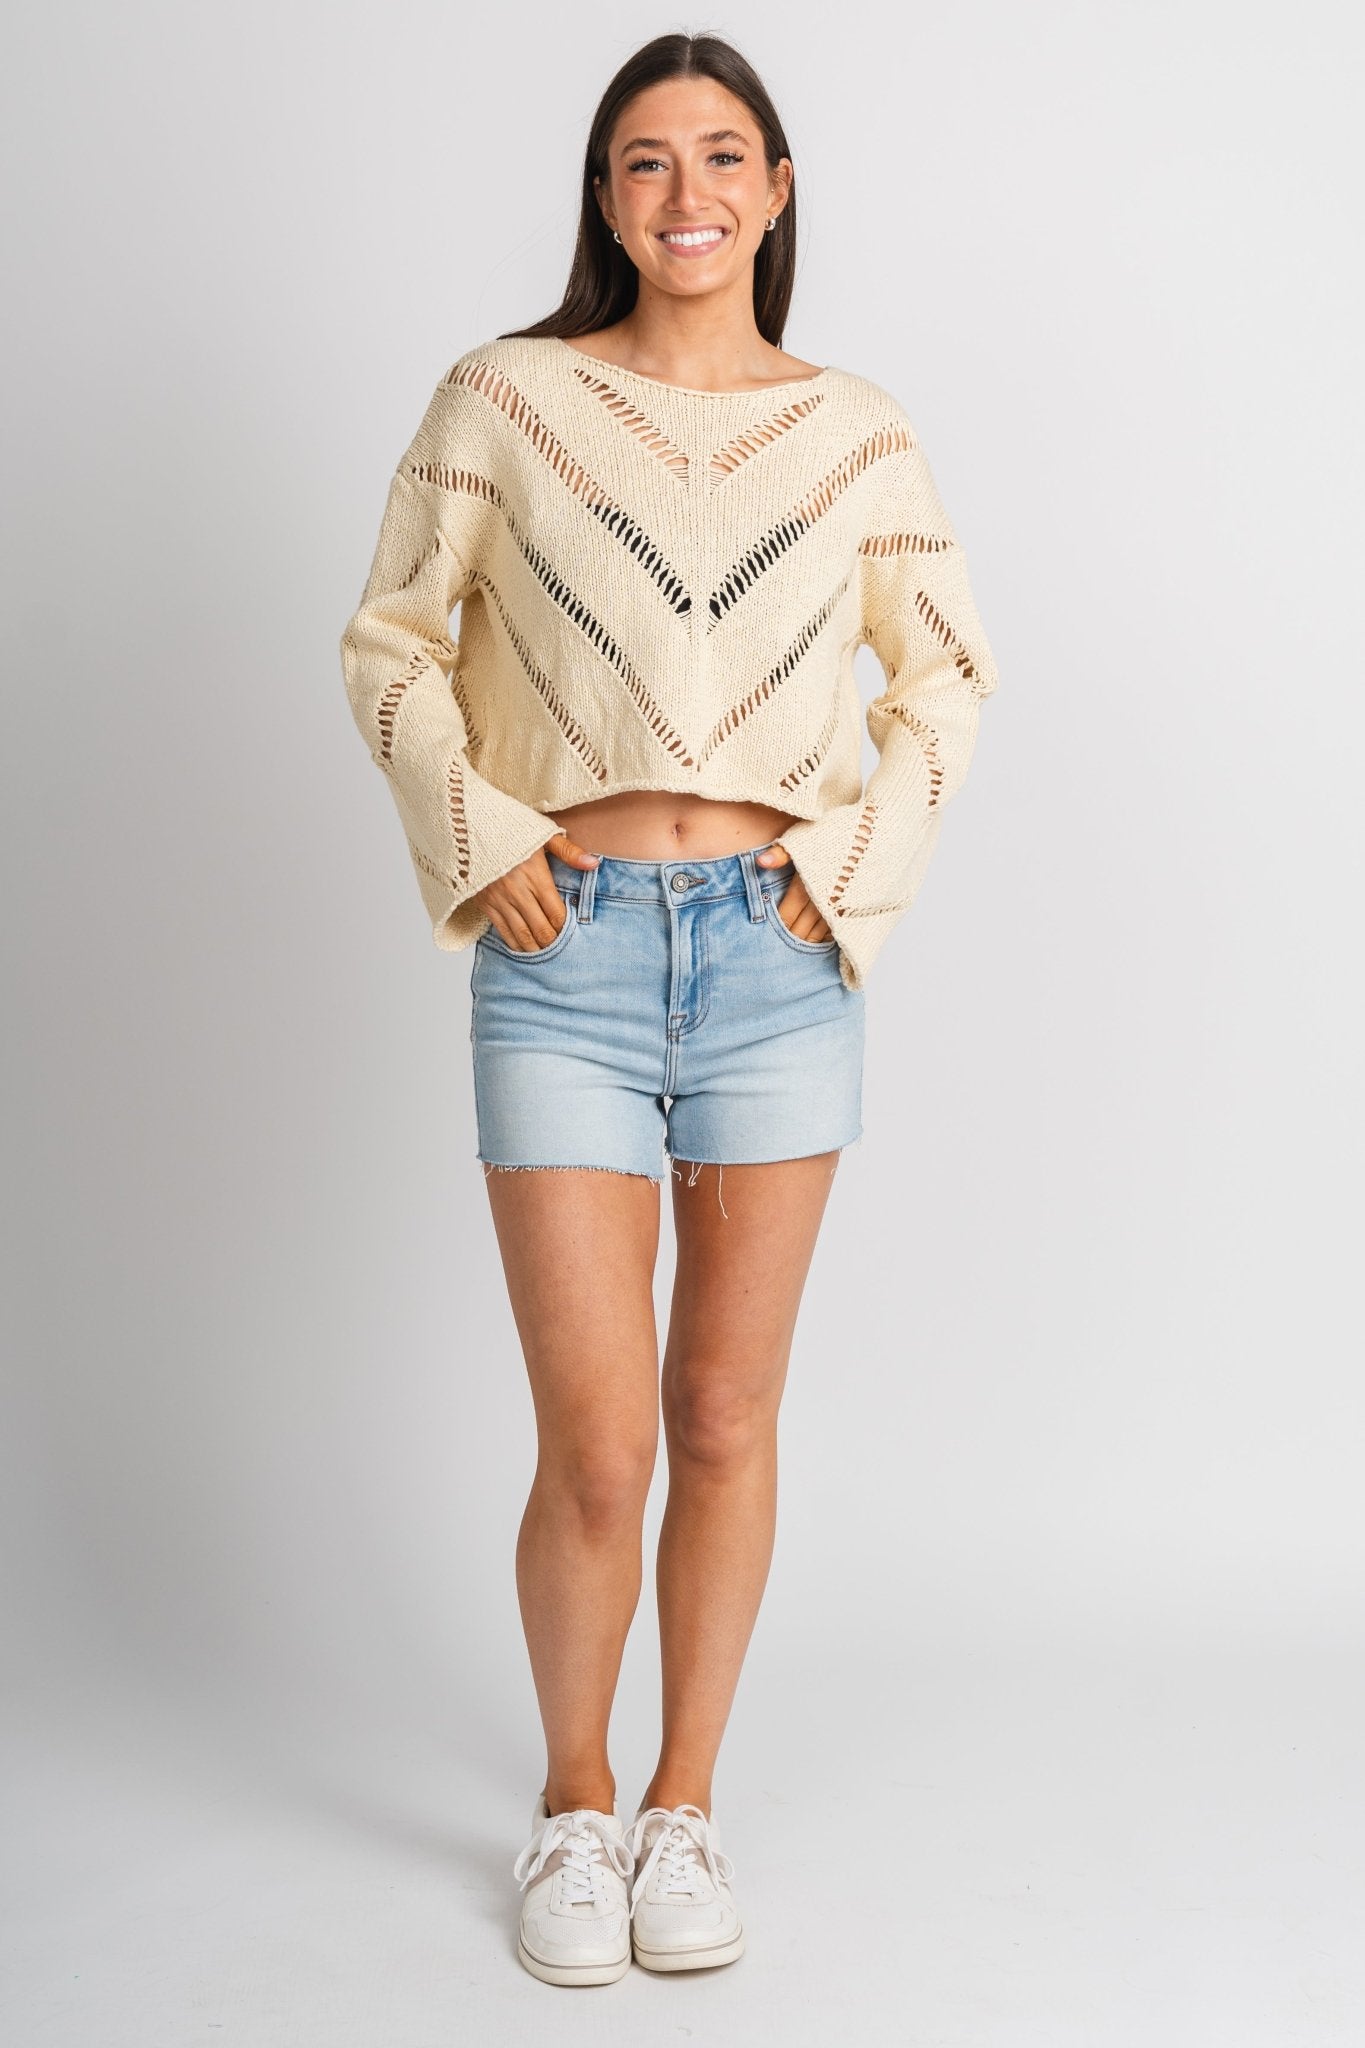 Distressed crop sweater natural - Trendy Sweaters | Cute Pullover Sweaters at Lush Fashion Lounge Boutique in Oklahoma City